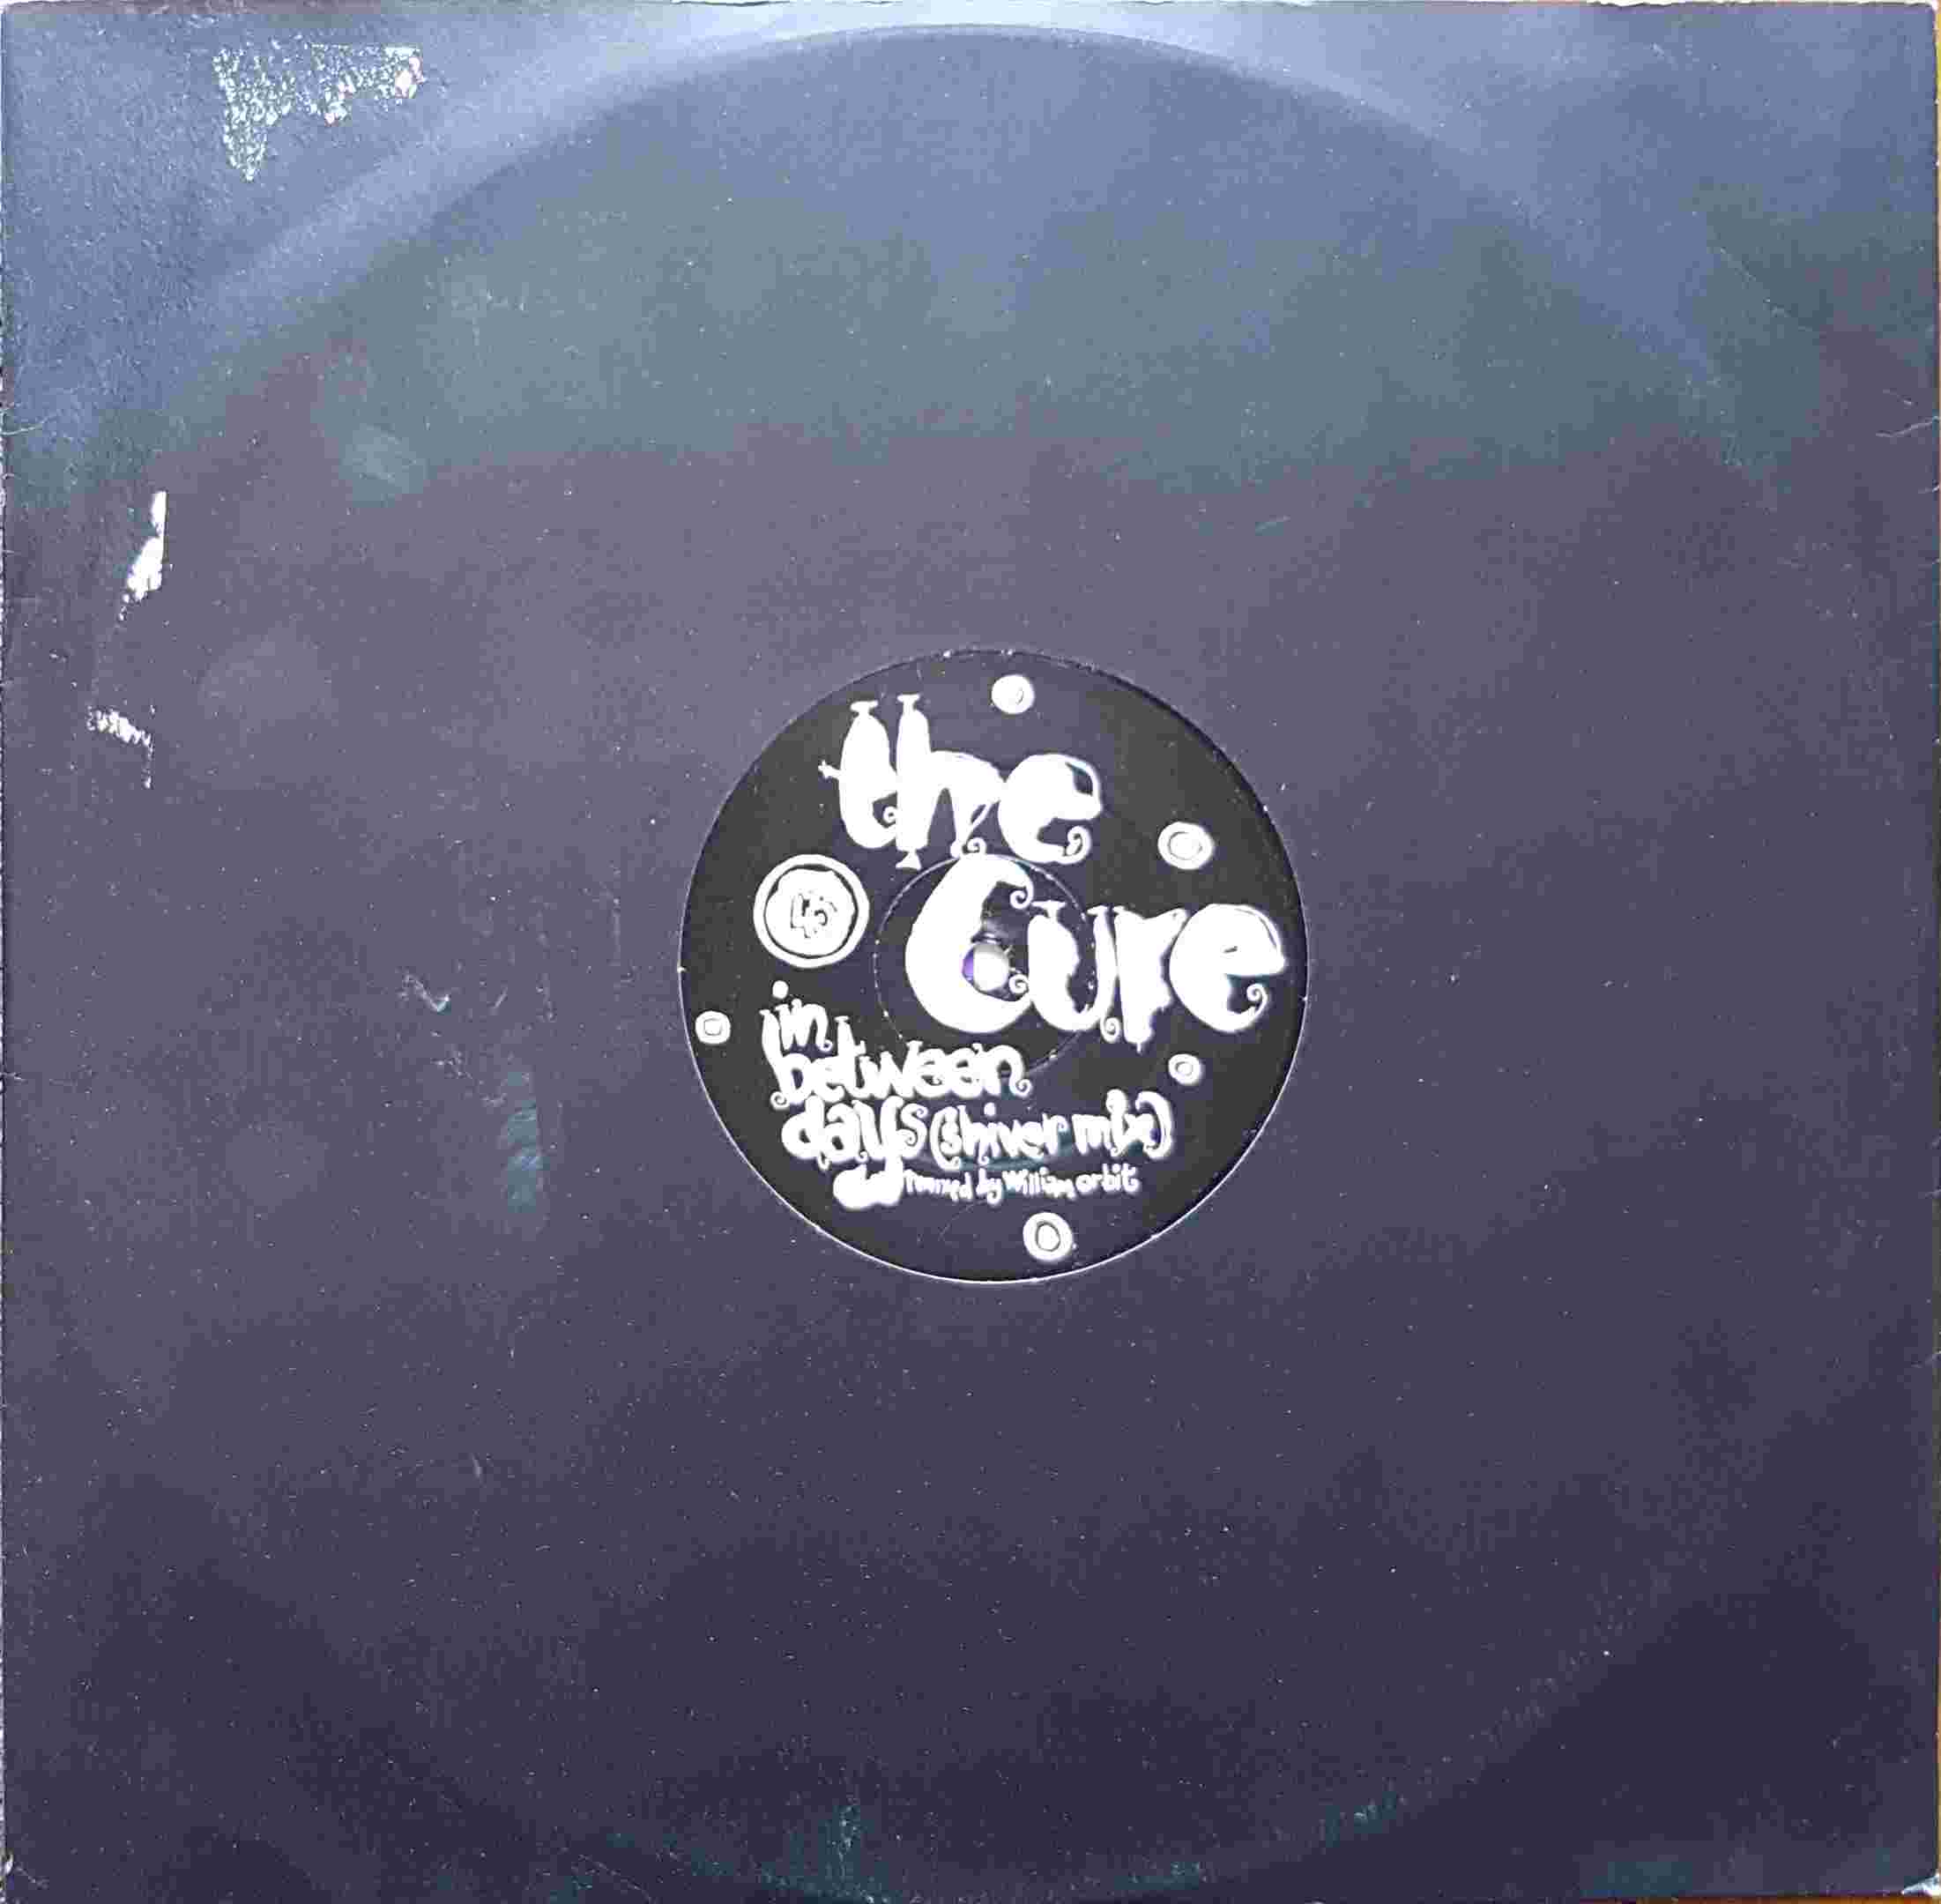 Picture of PR 01703 In between days (Shiver mix) by artist The Cure 